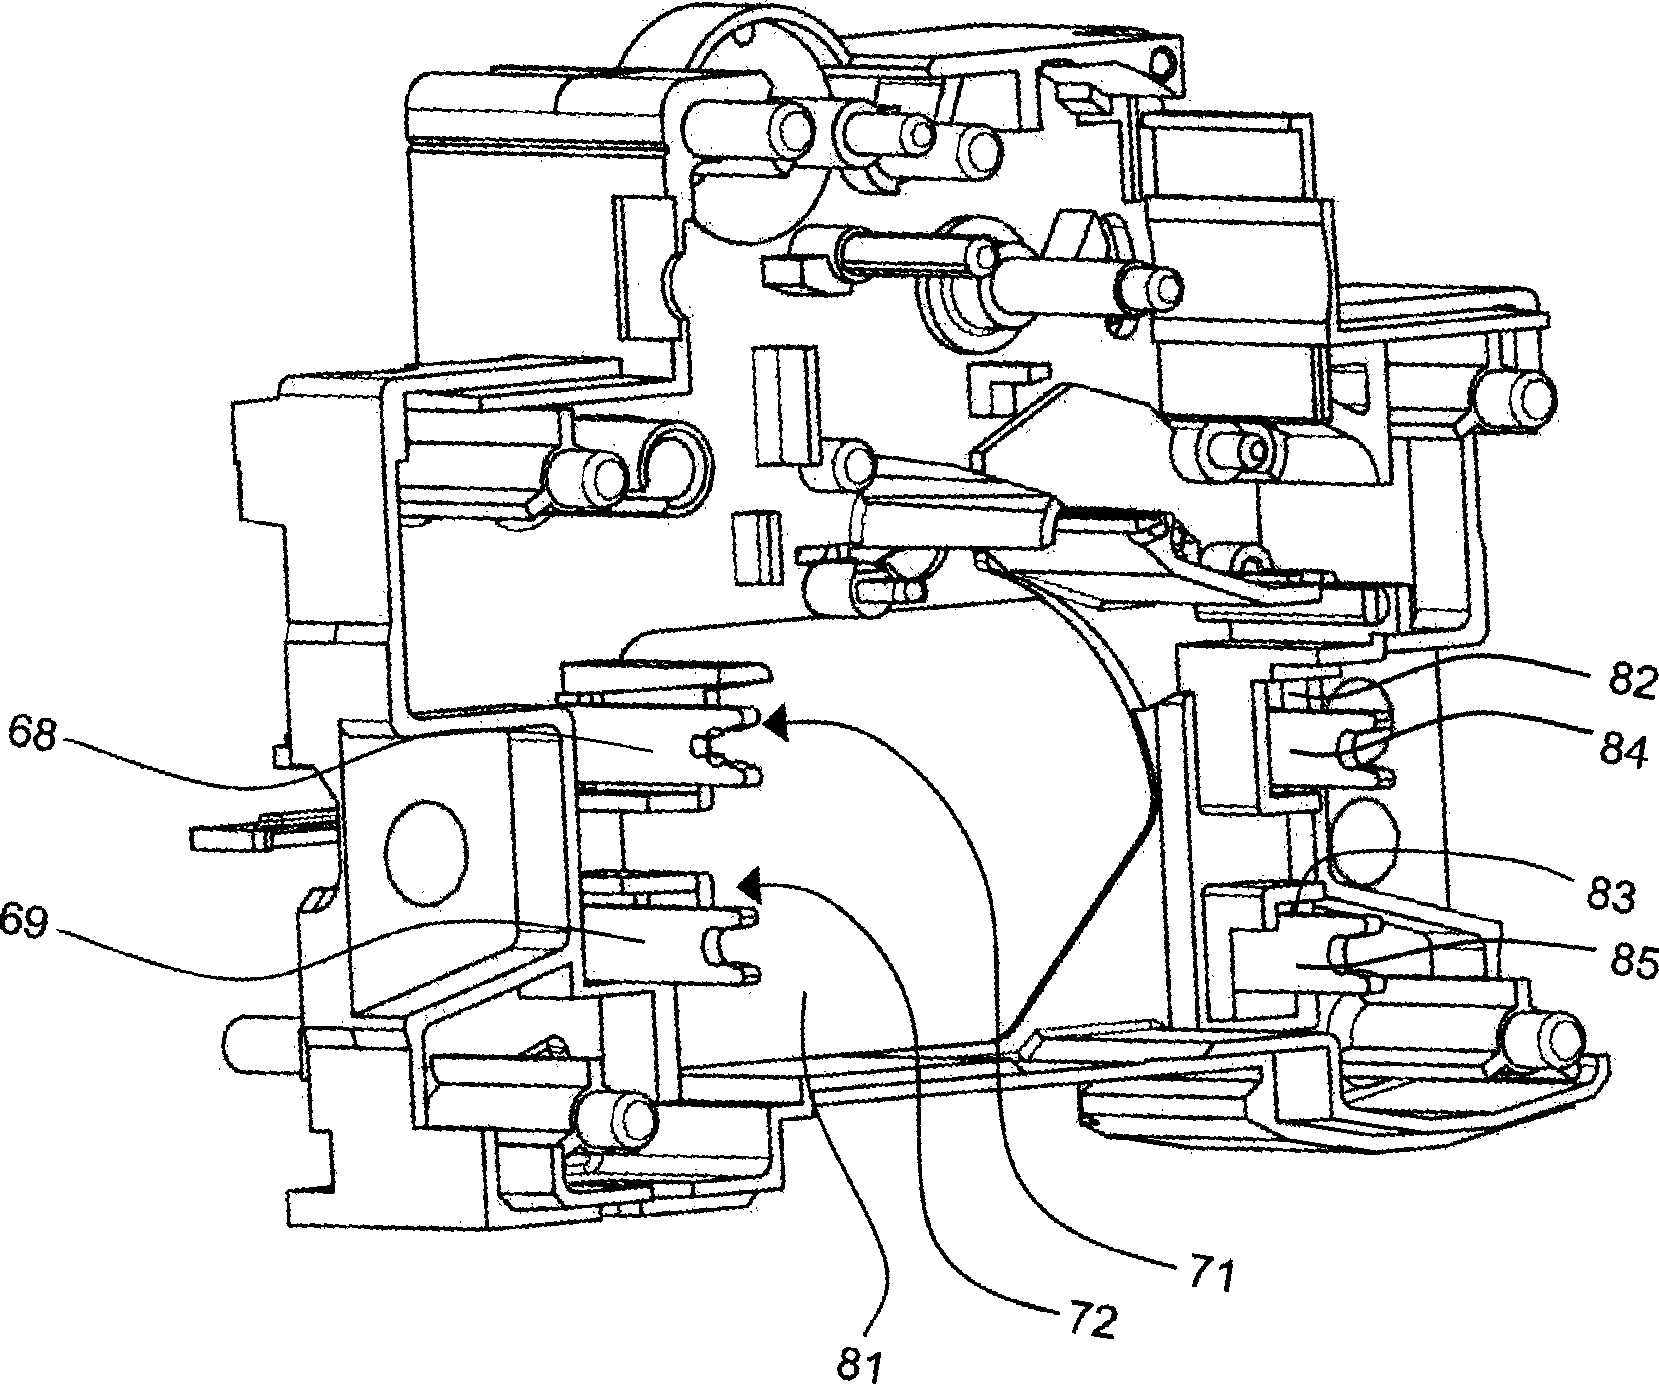 Electric device with differential protection